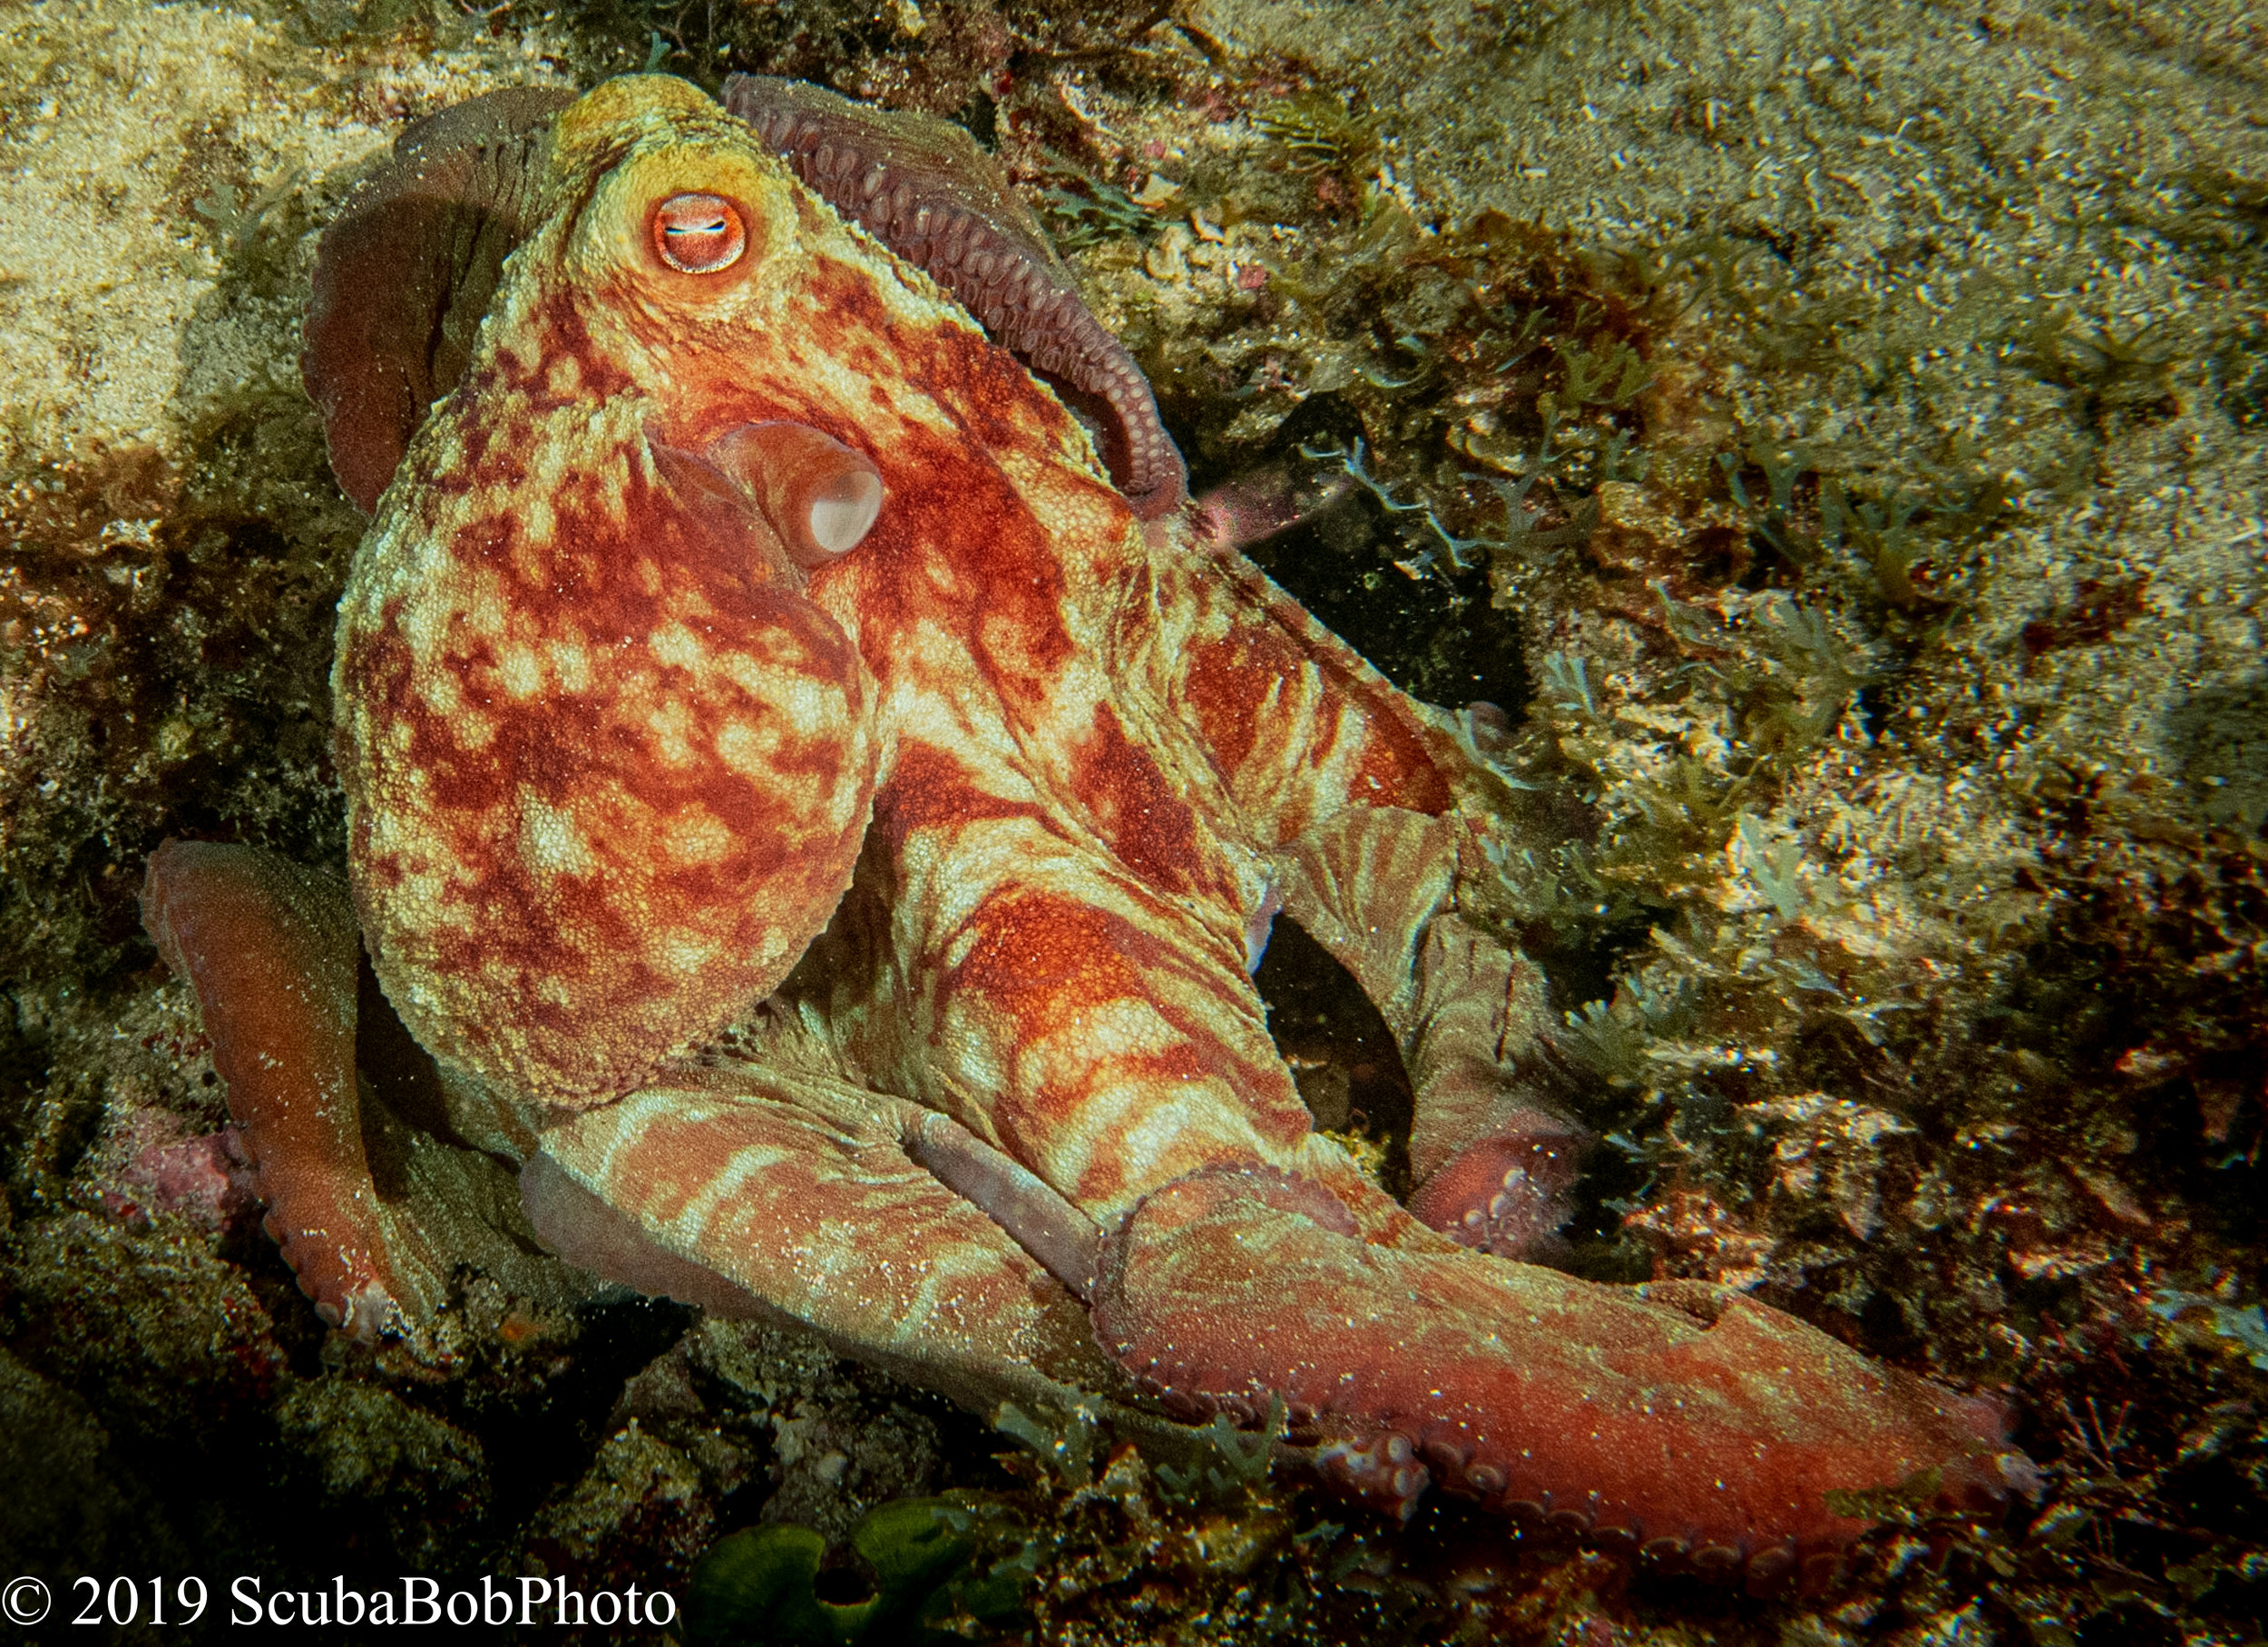 Same Octopus but it had changed colors